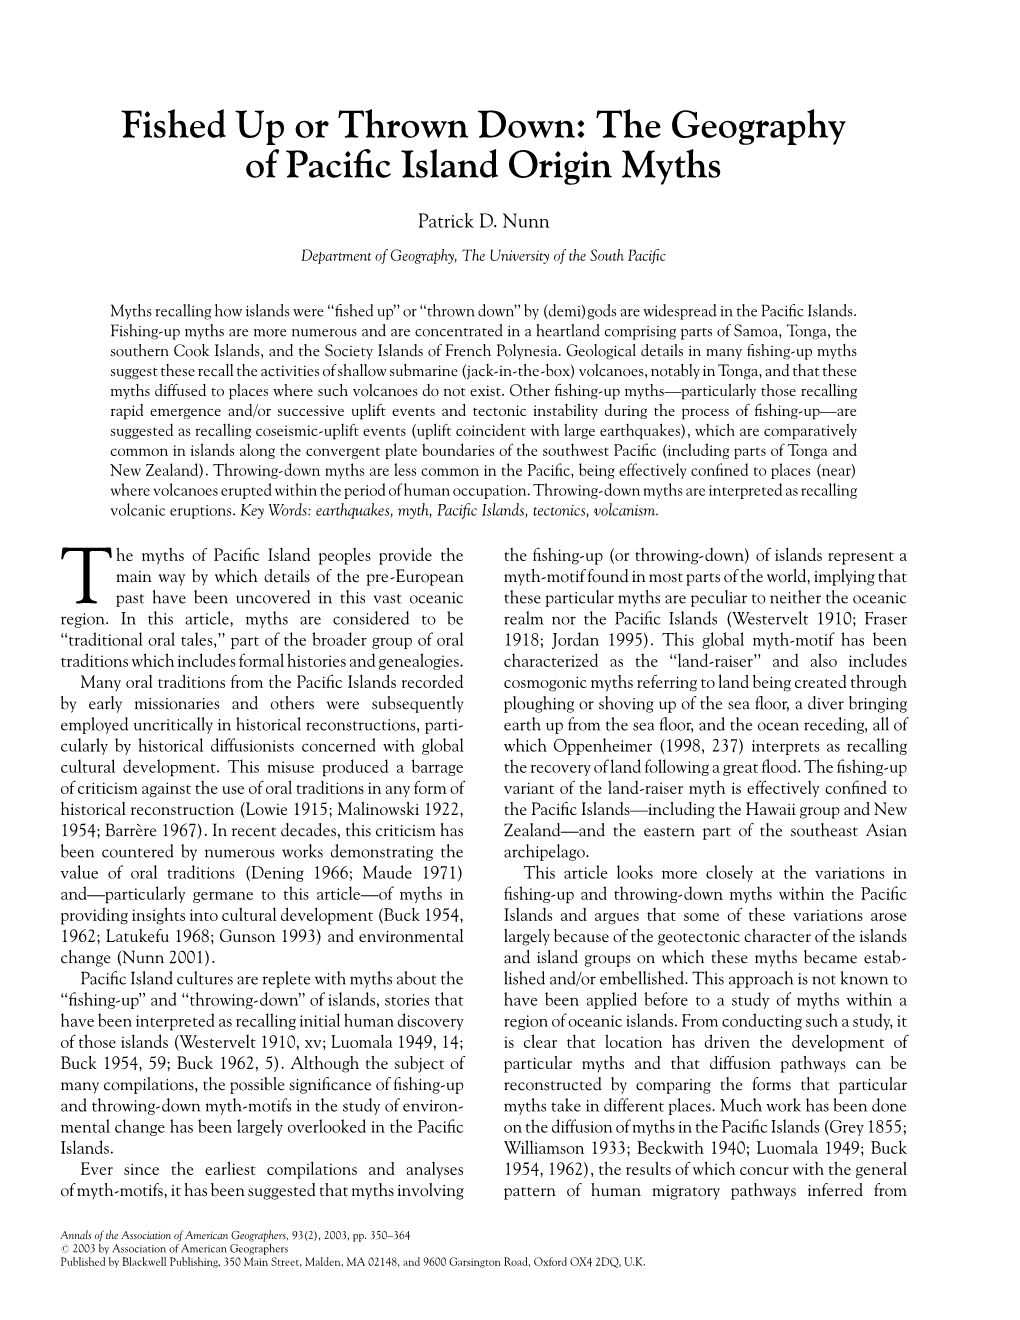 The Geography of Pacific Island Origin Myths